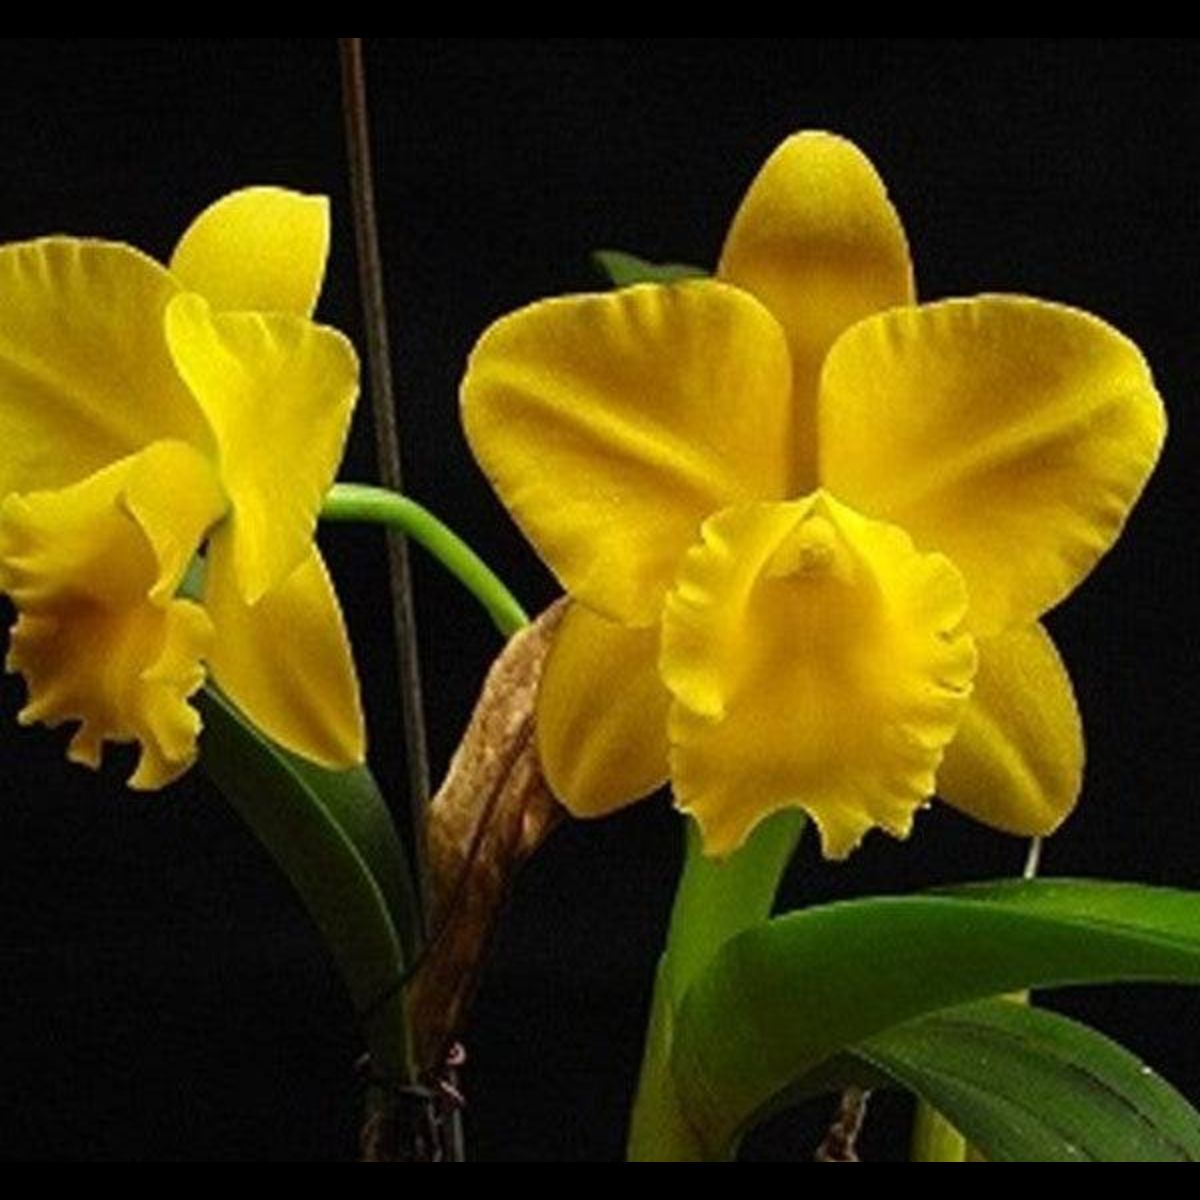 Cattleya Rth. Mini Yellow Orchid - Vibrant Yellow Blooms - Shop Now for Exquisite Beauty and Charm